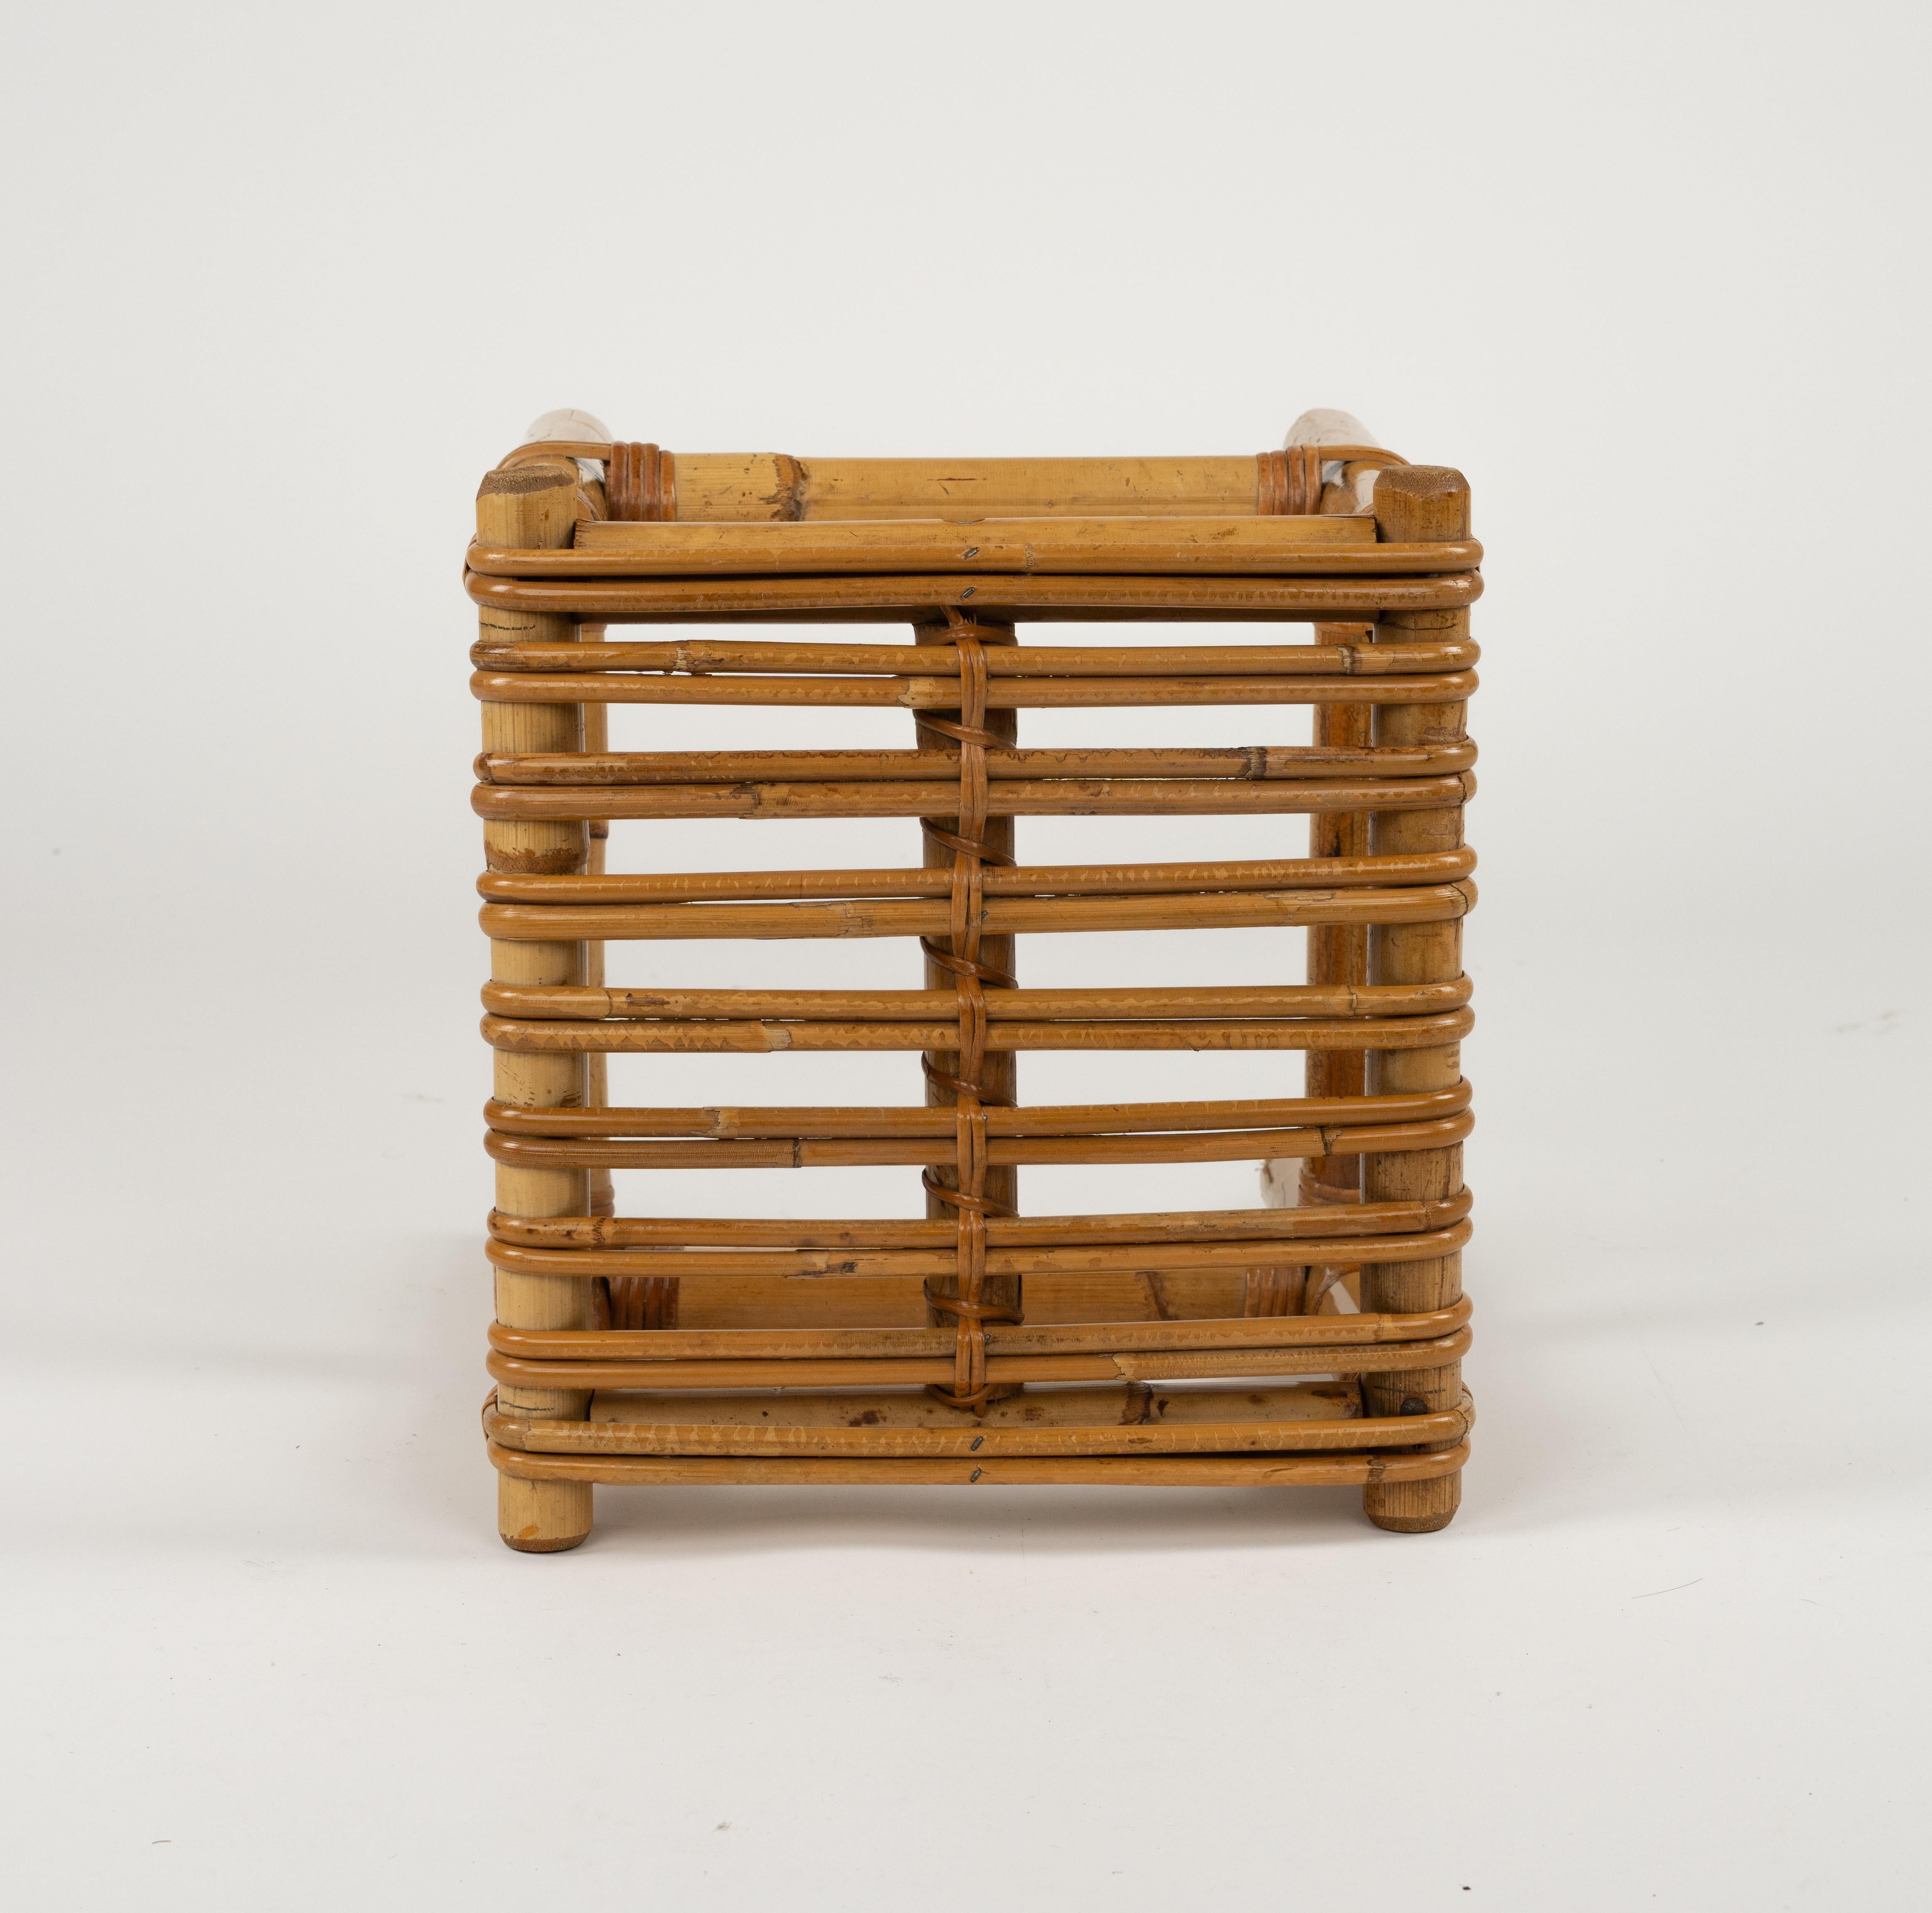 Midcentury Stool or Pouf in Bamboo and Rattan , Italy 1970s For Sale 4